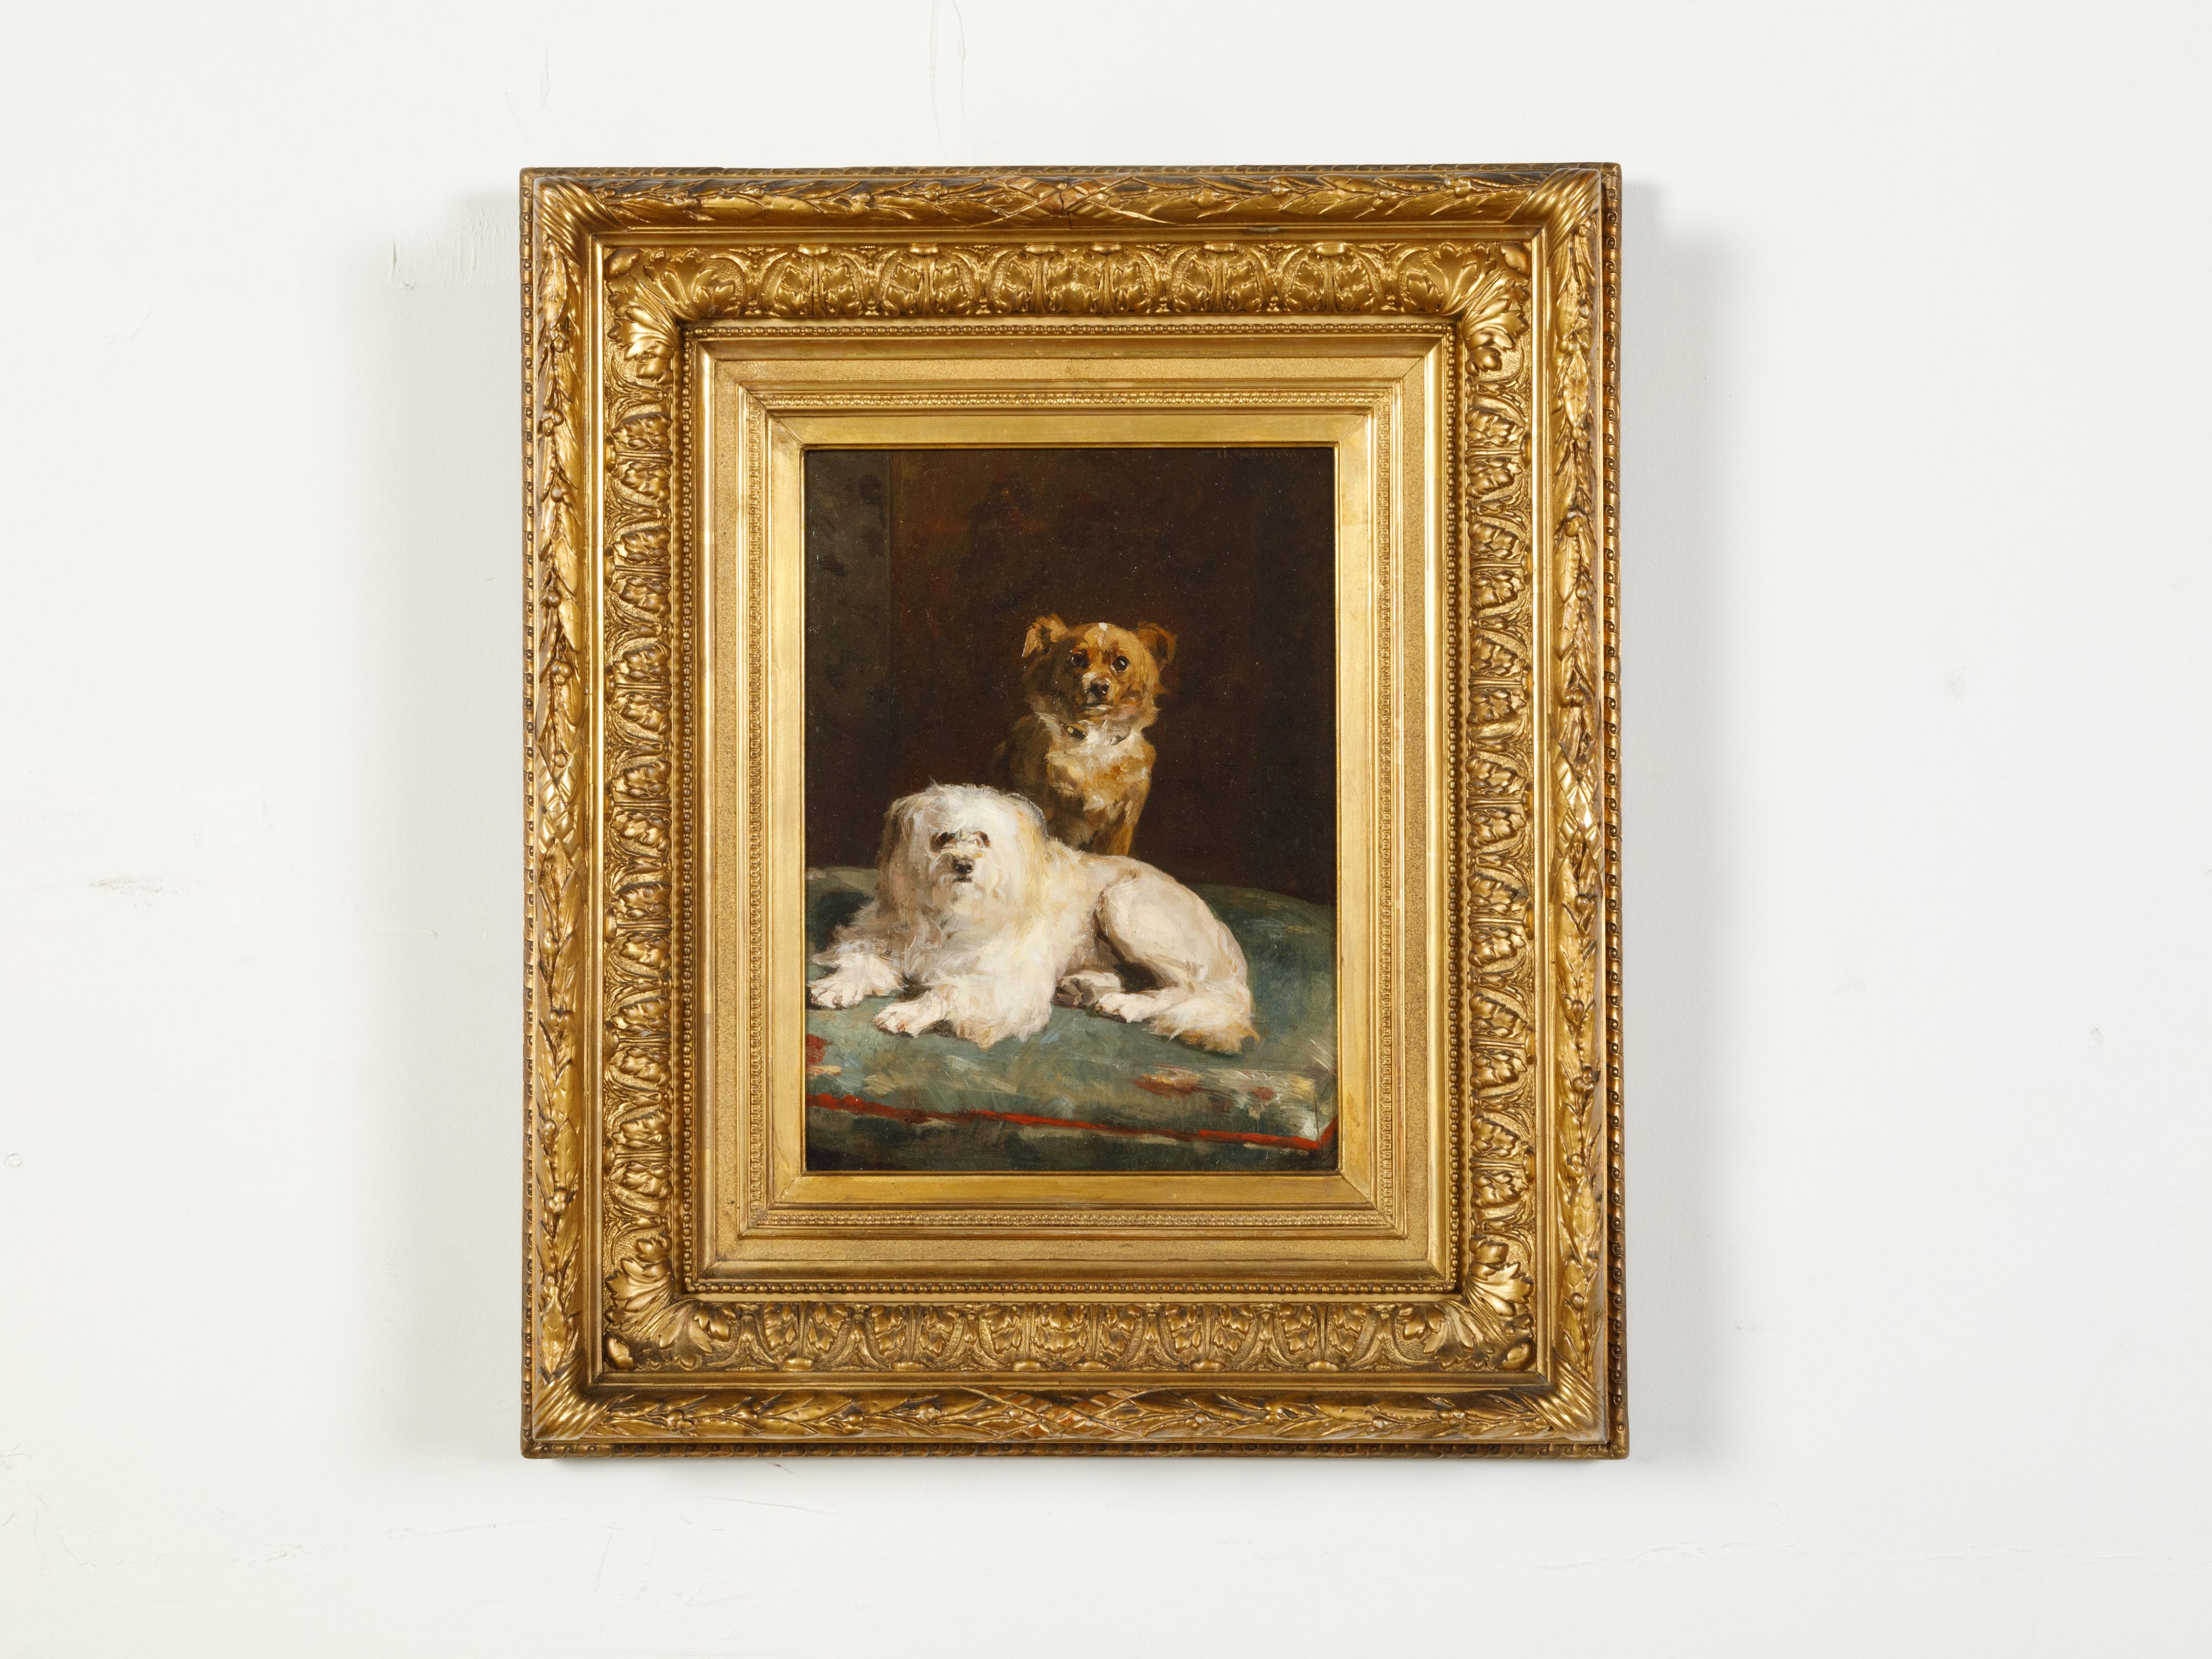 A Belgian framed oil on canvas painting by Charles Van den Eycken (1859 – 1923), depicting two dogs in an interior. Created in Belgium during the second half of the 19th century, this oil on canvas depicts an interior scene. Two small dogs, a white